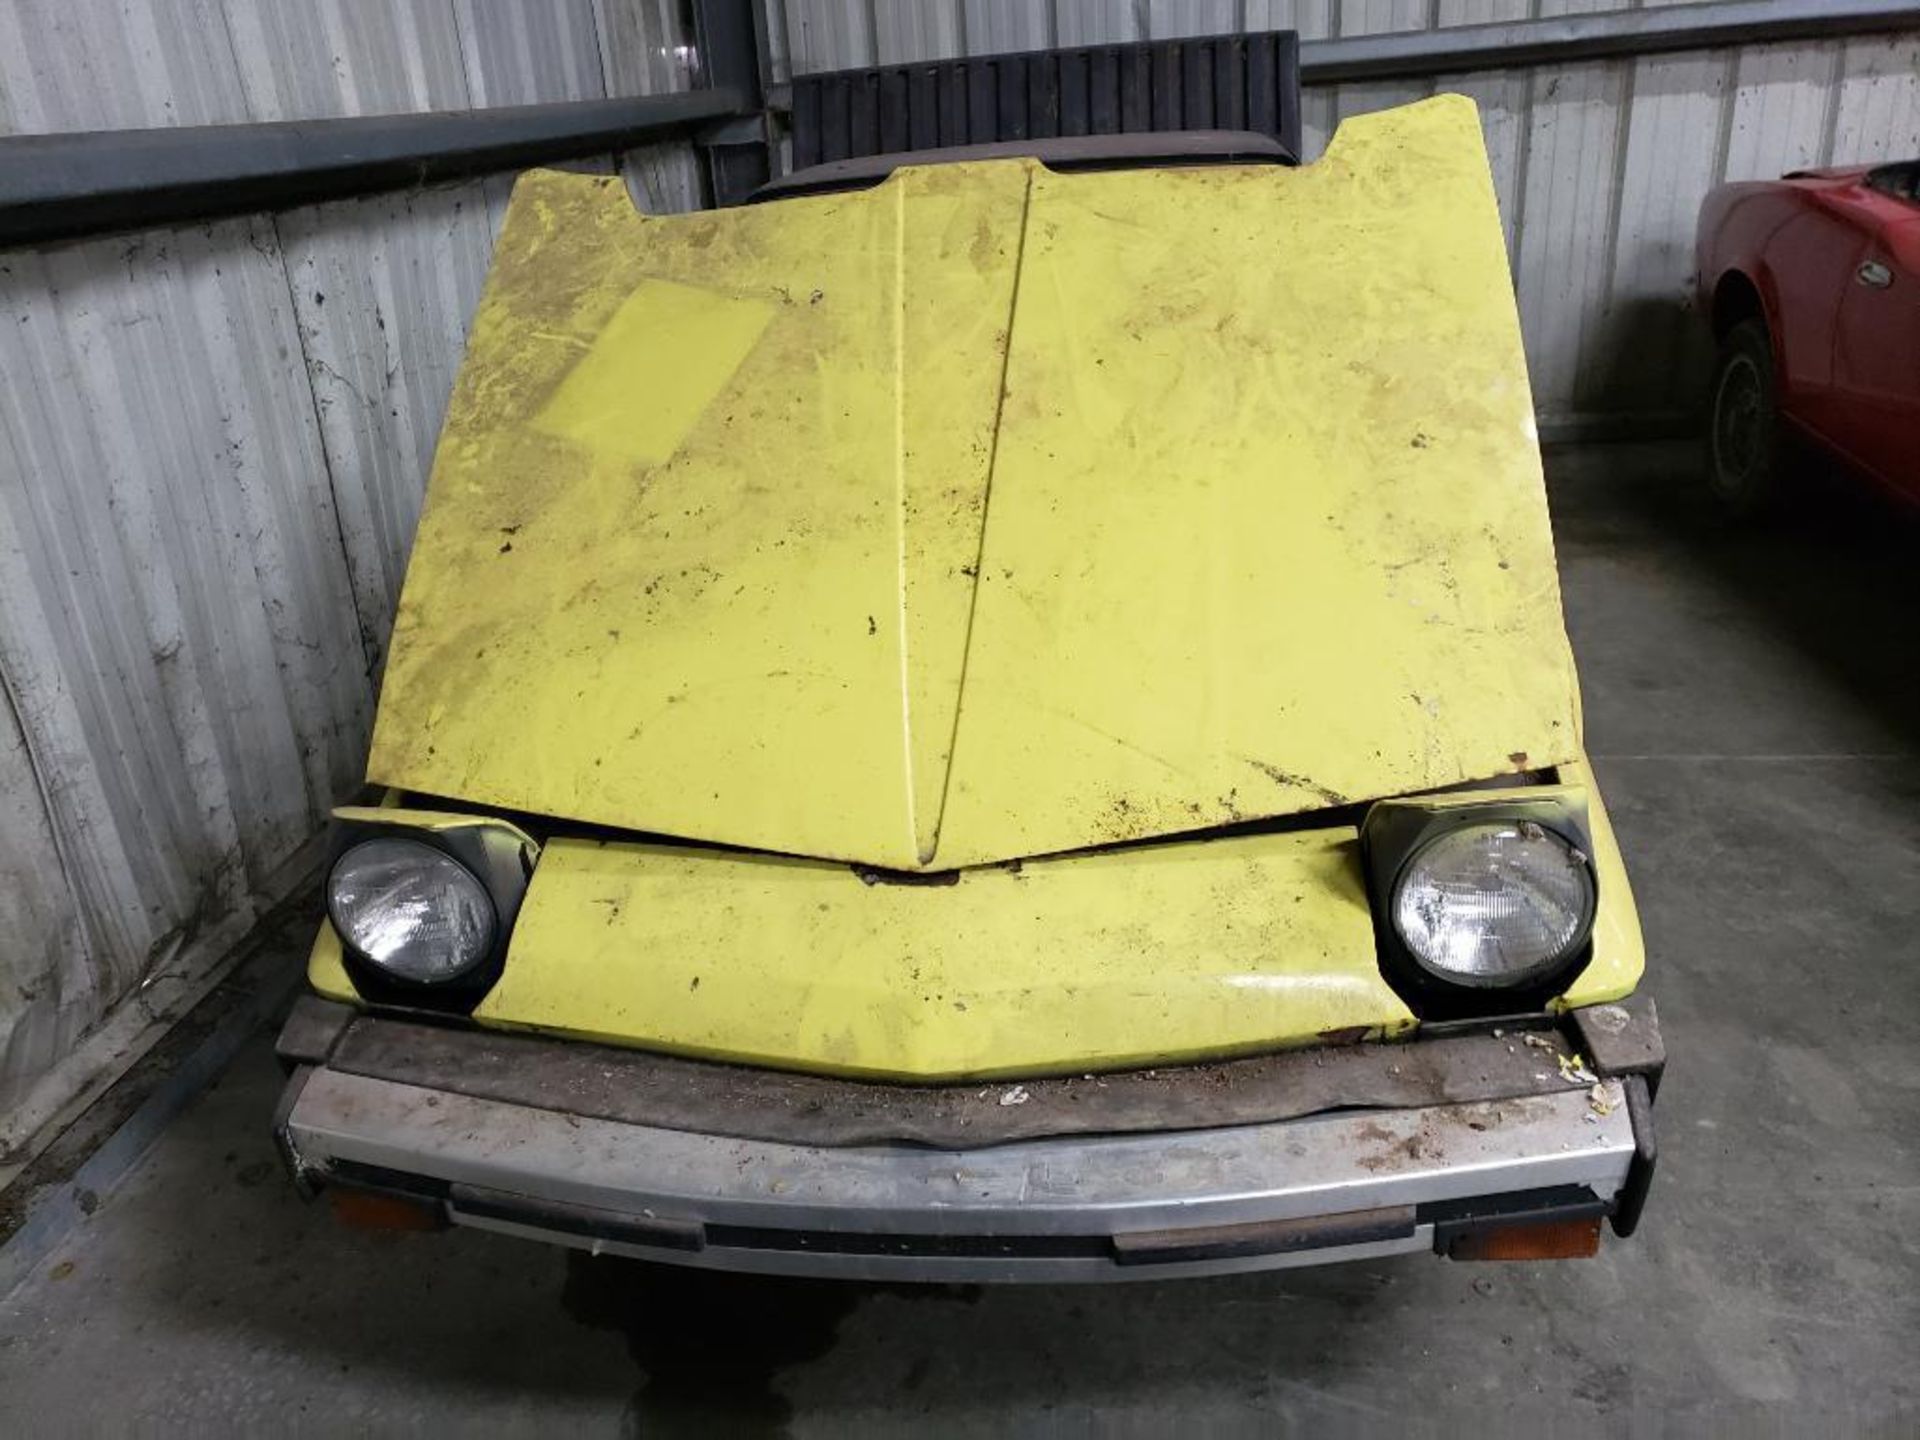 1981 Fiat Bertone. VIN number ZFABS00A6B8142844. Parts repairable. Vehicle IS titled. - Image 5 of 29